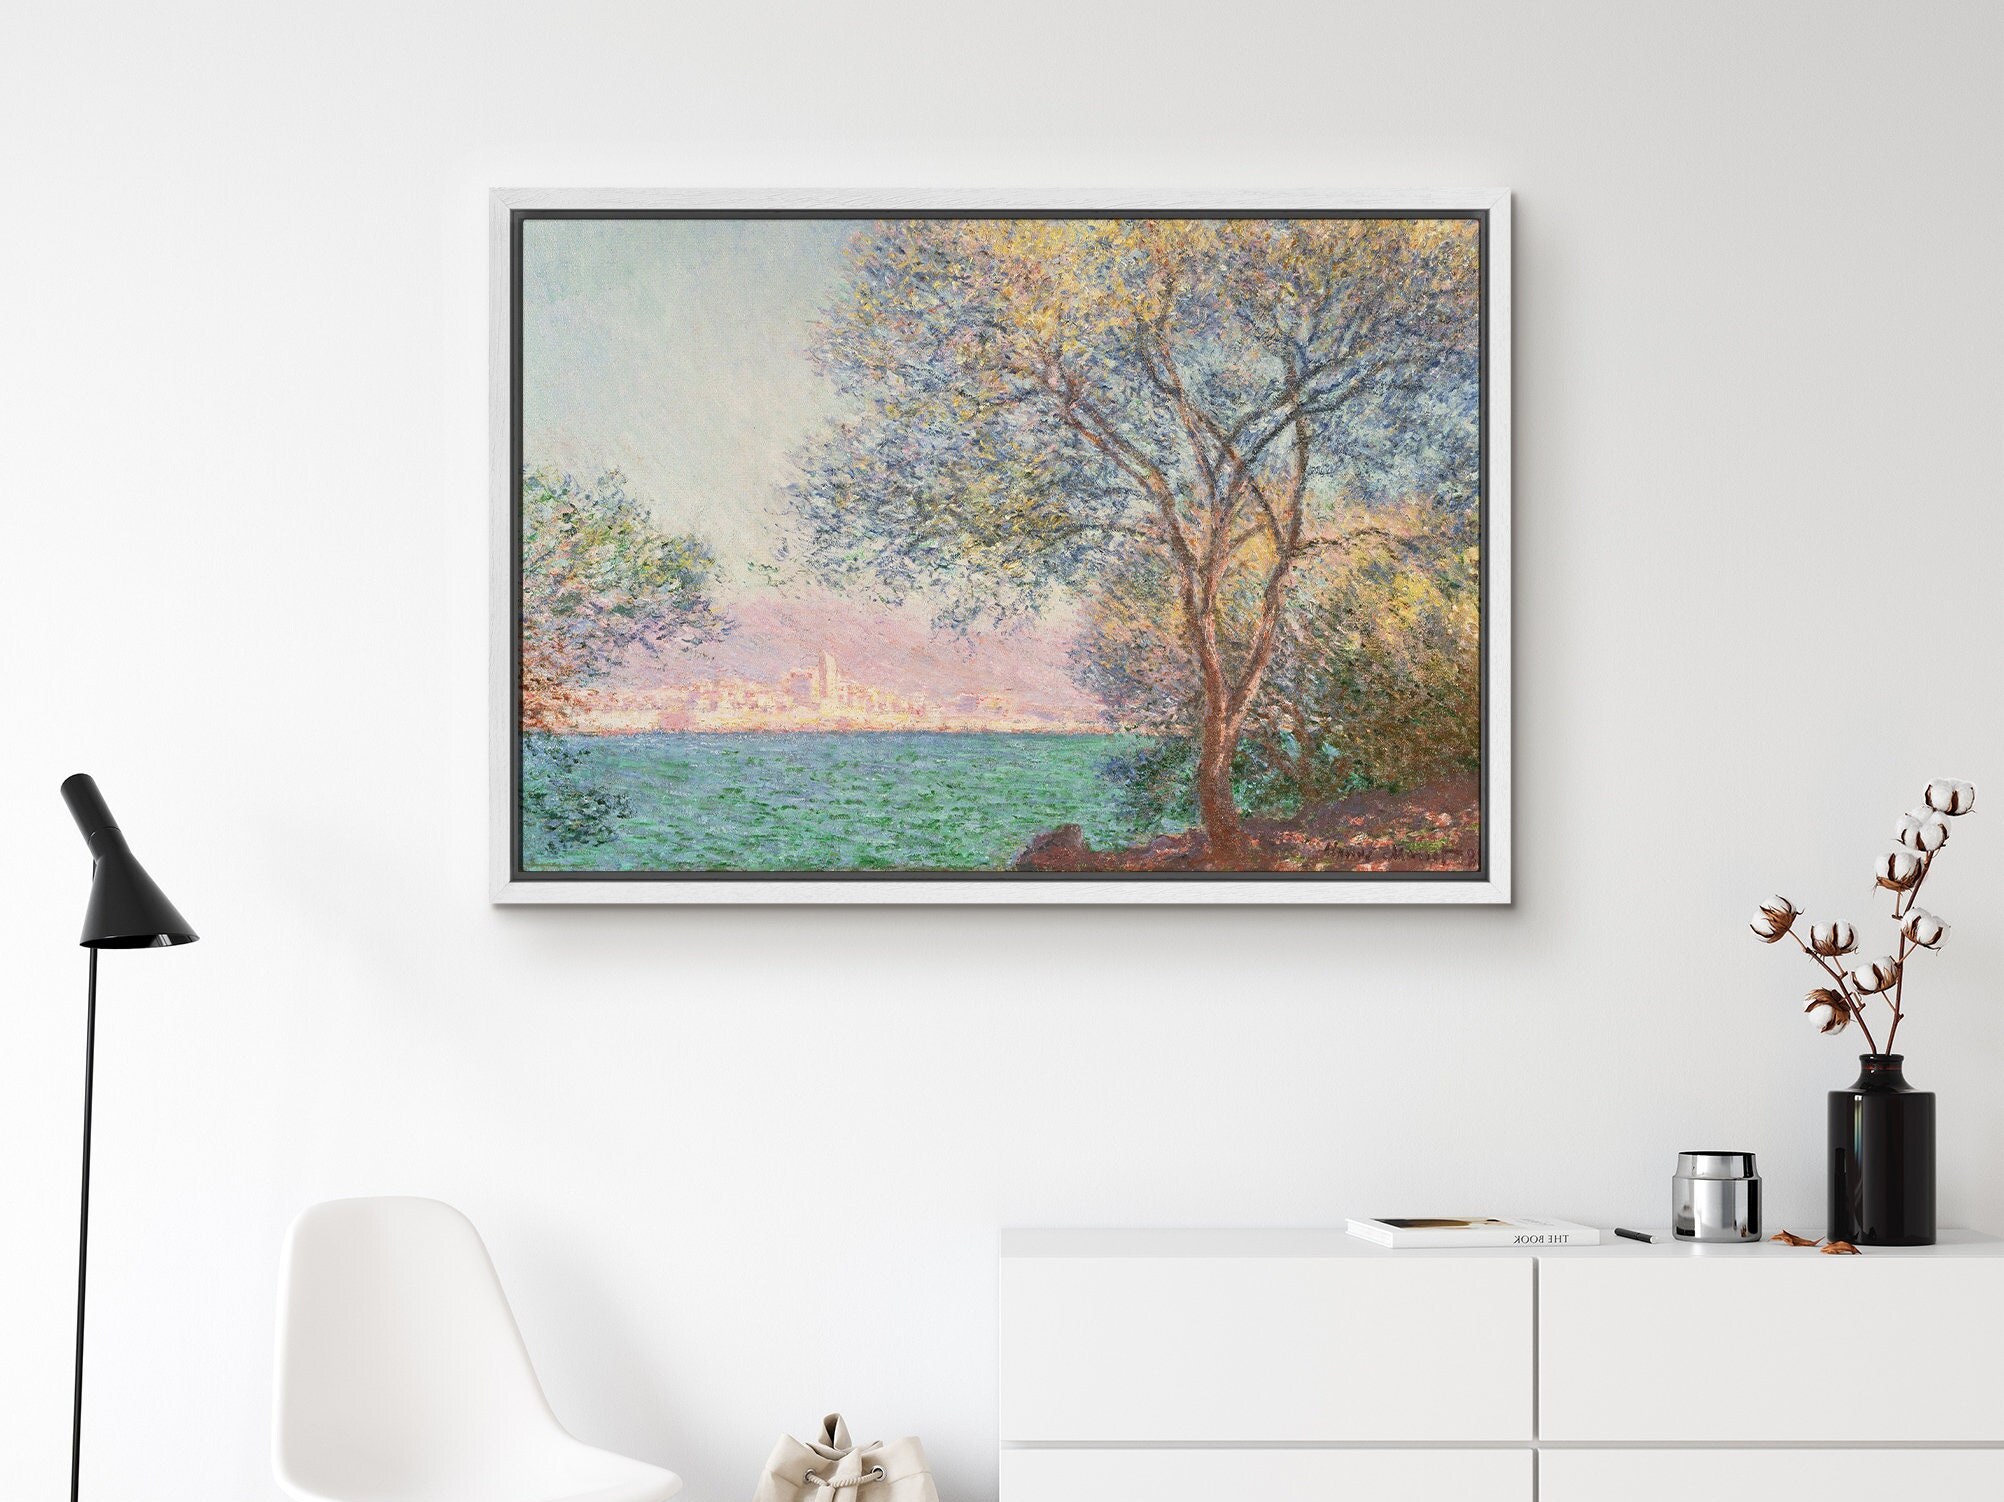 Easysuger Claude Monet Wall Art Antibes in the Morning - Etsy